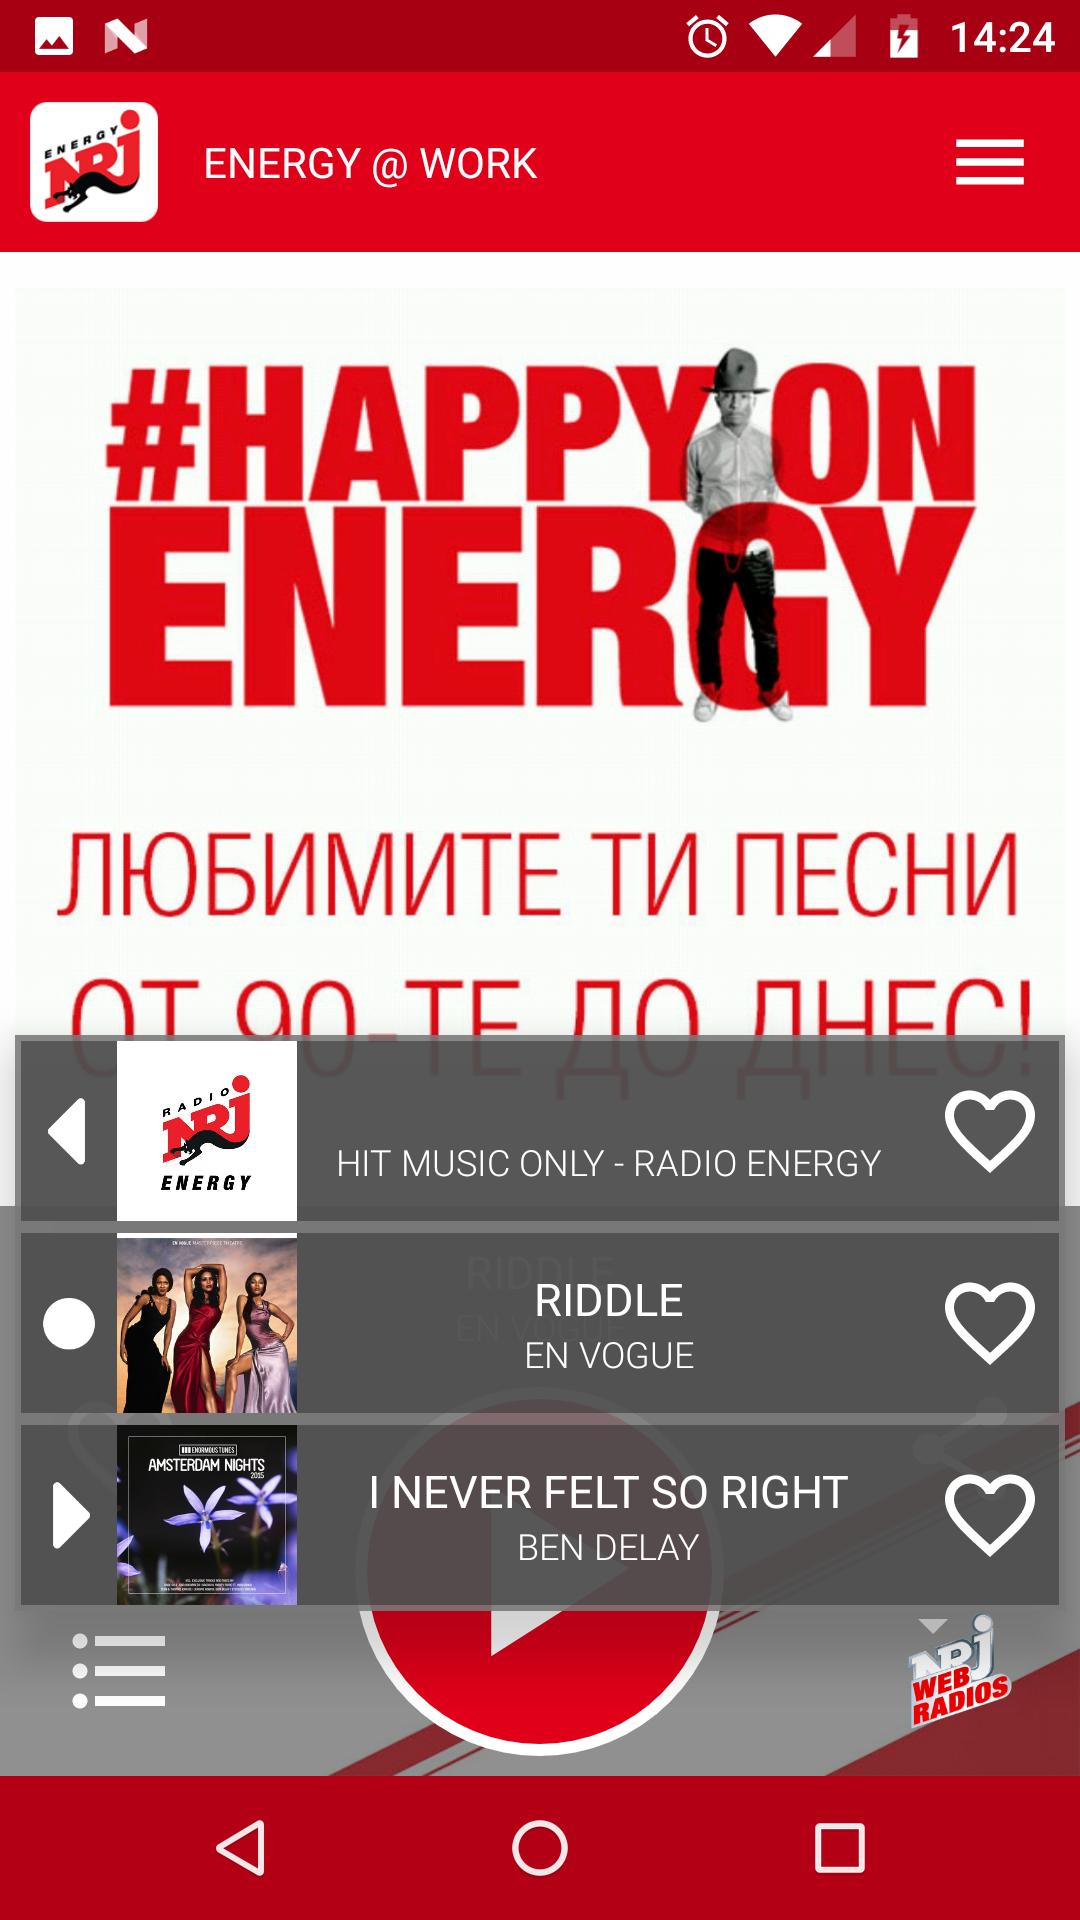 Radio ENERGY for Android - APK Download